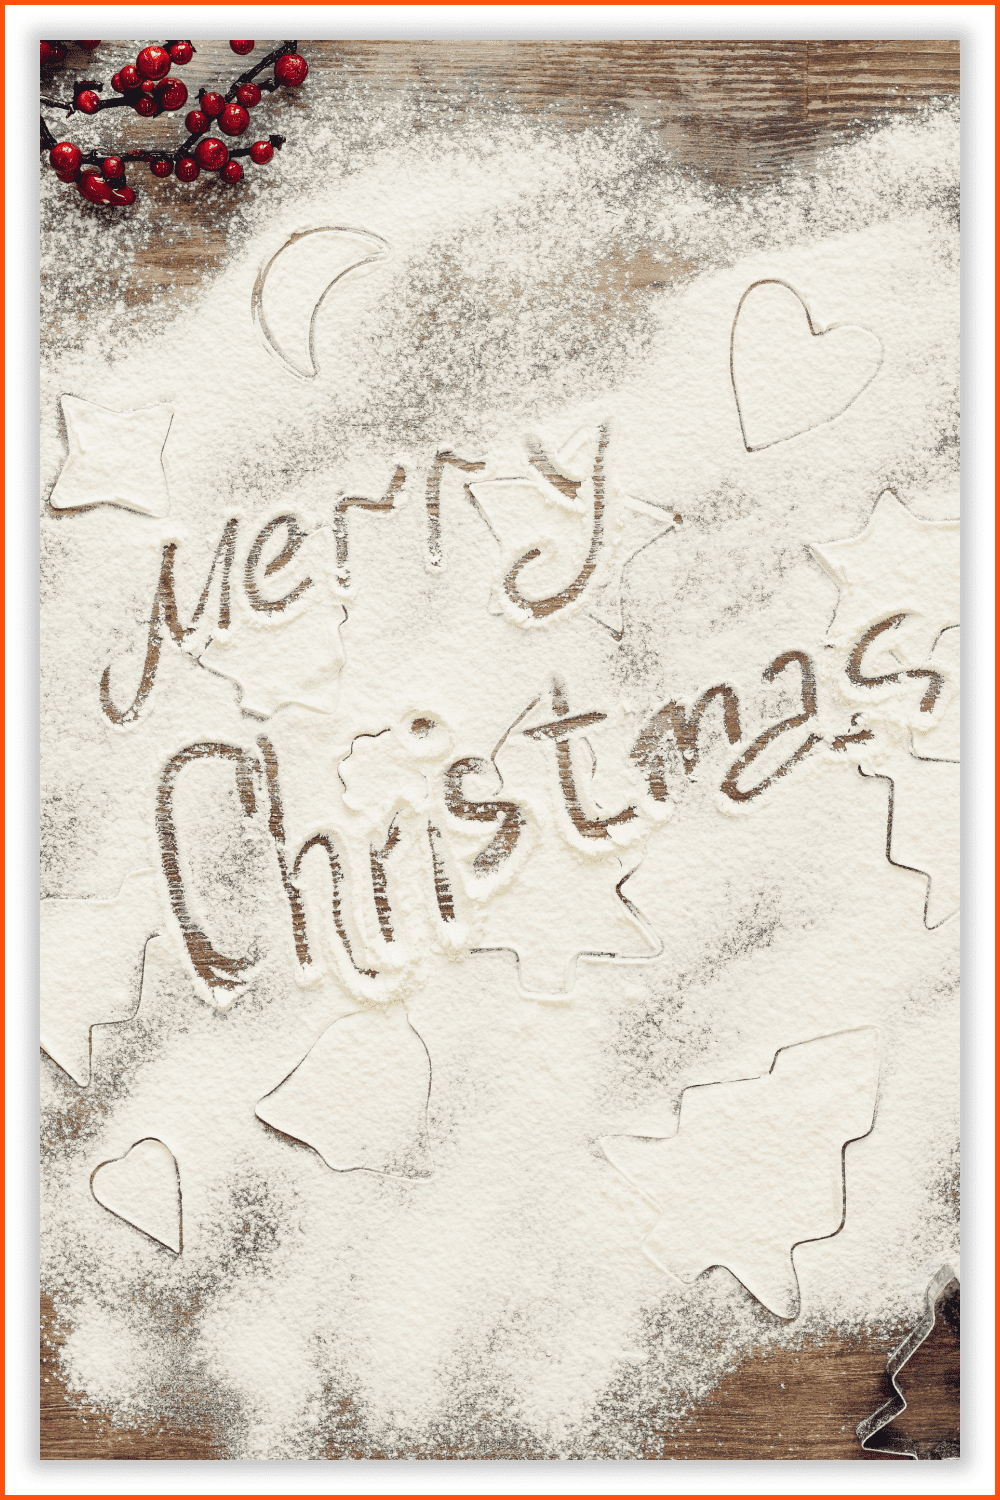 Photo of a Merry Christmas inscription in flour on the table.